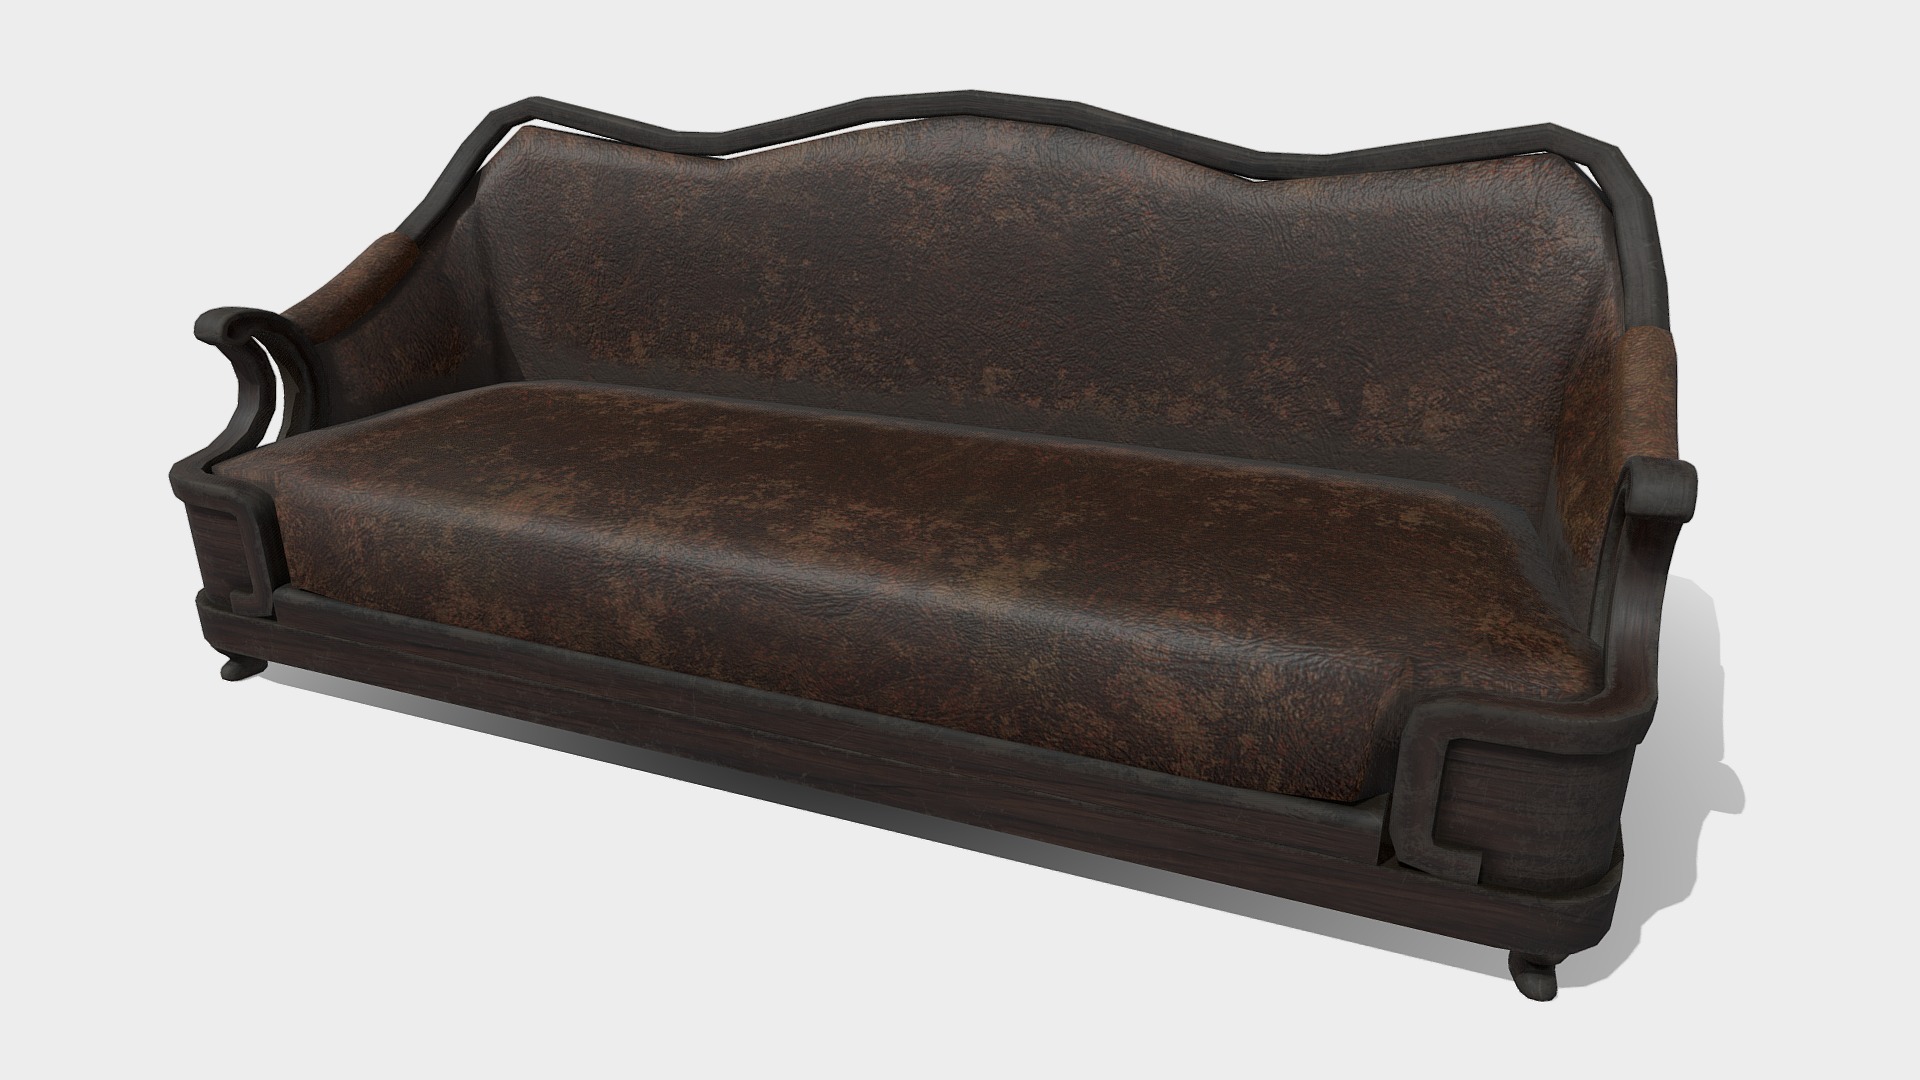 3D model Grand Couch - This is a 3D model of the Grand Couch. The 3D model is about a brown leather briefcase.